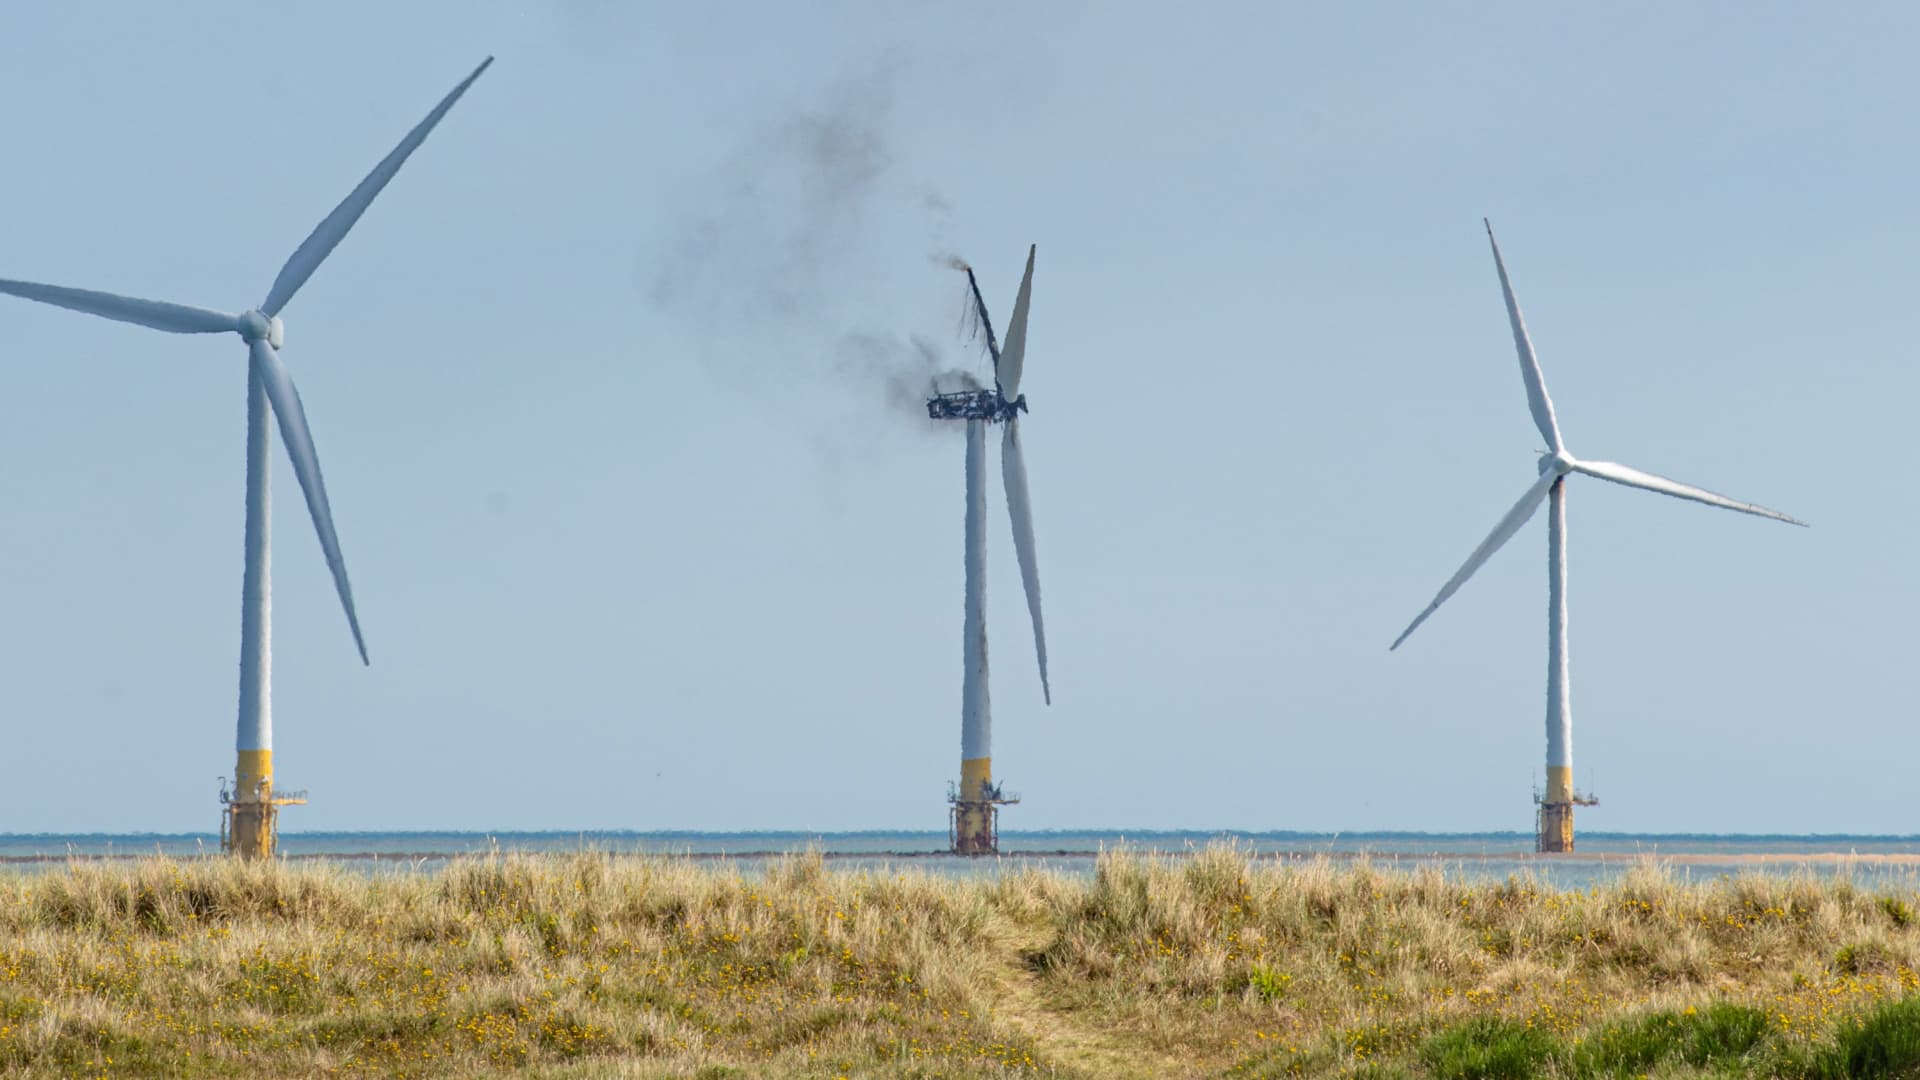 Offshore wind turbine catches fire off east coast of Britain